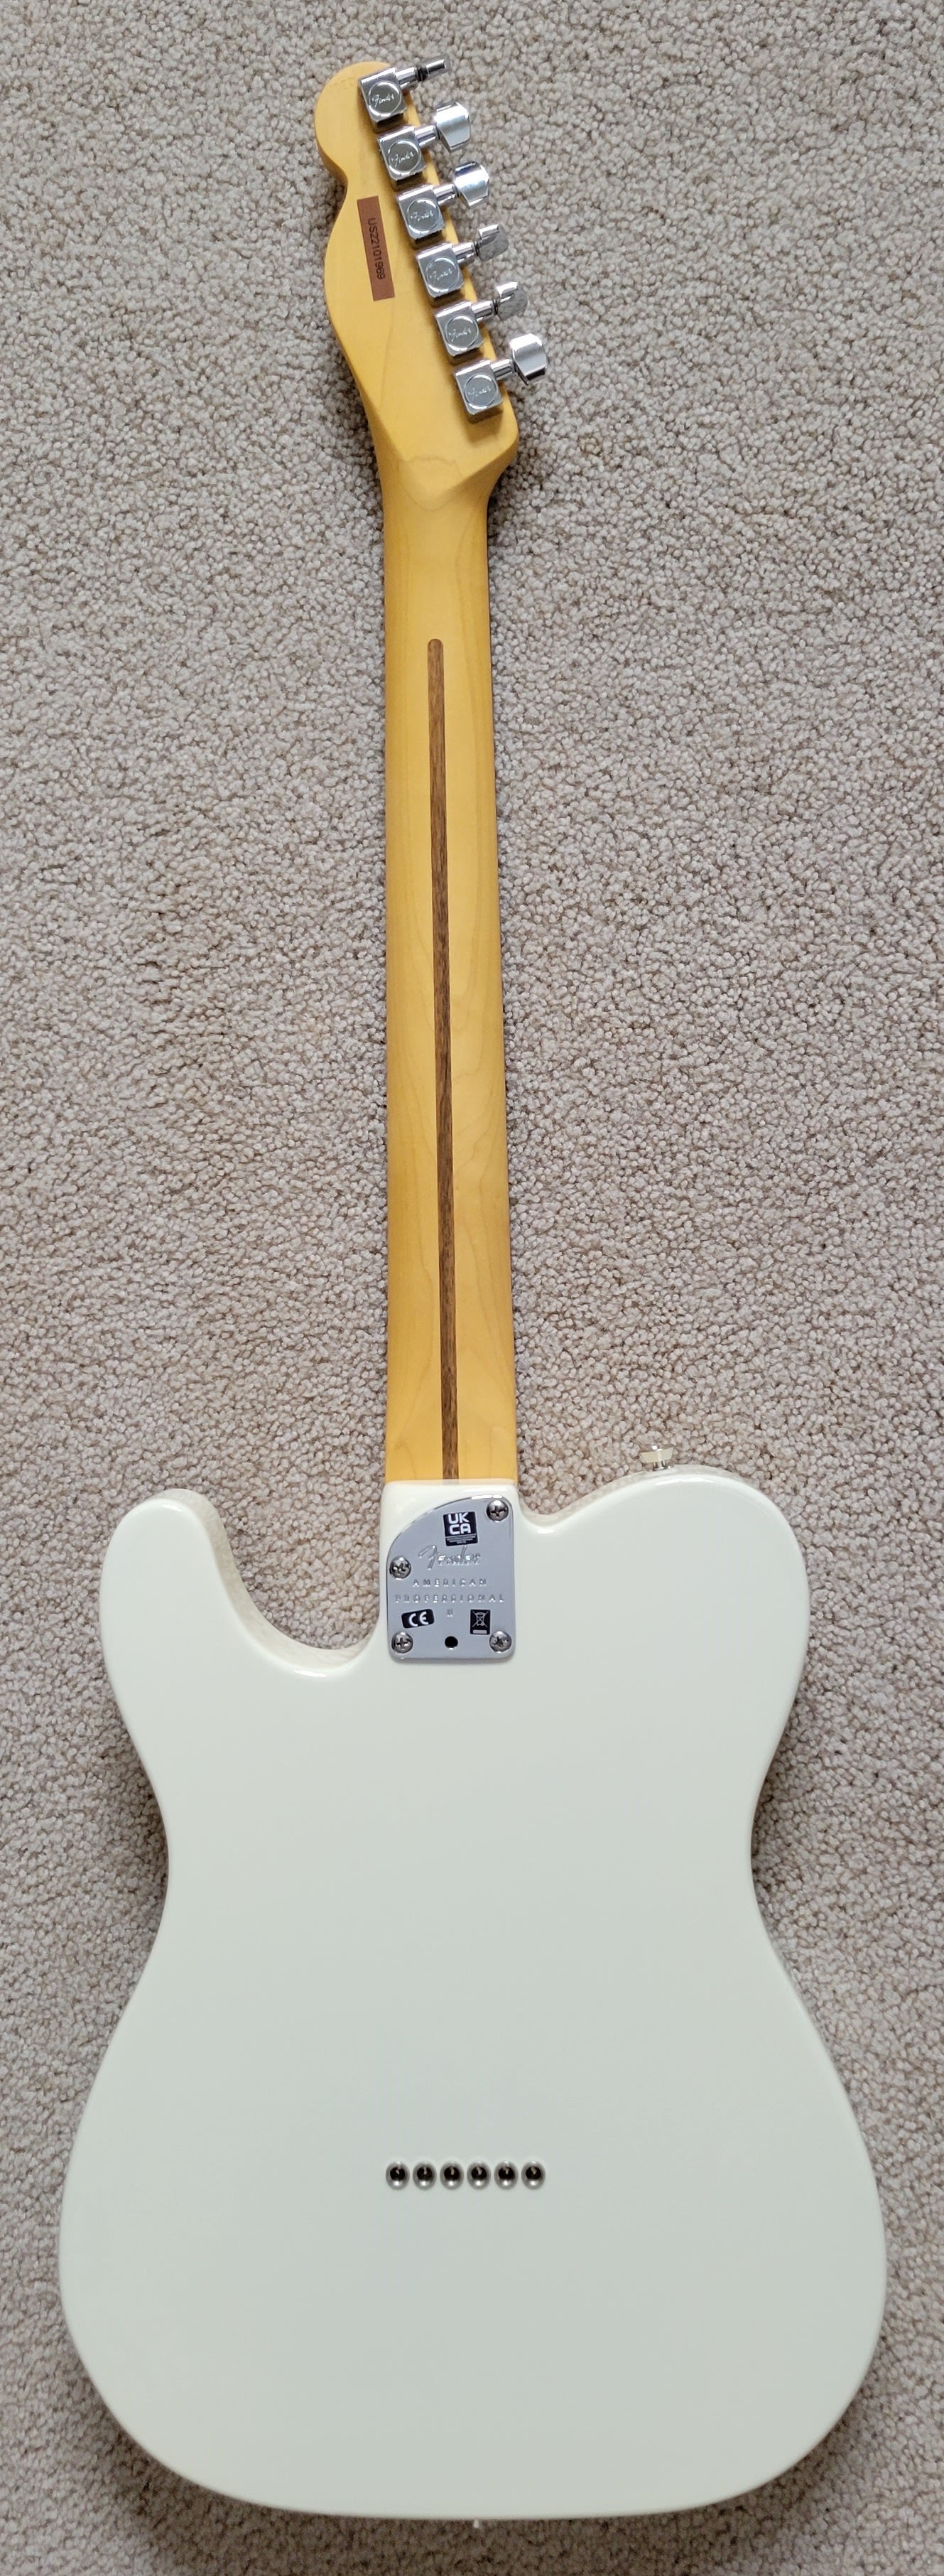 Fender American Professional II Telecaster Electric Guitar, Olympic White,  Deluxe Molded Case